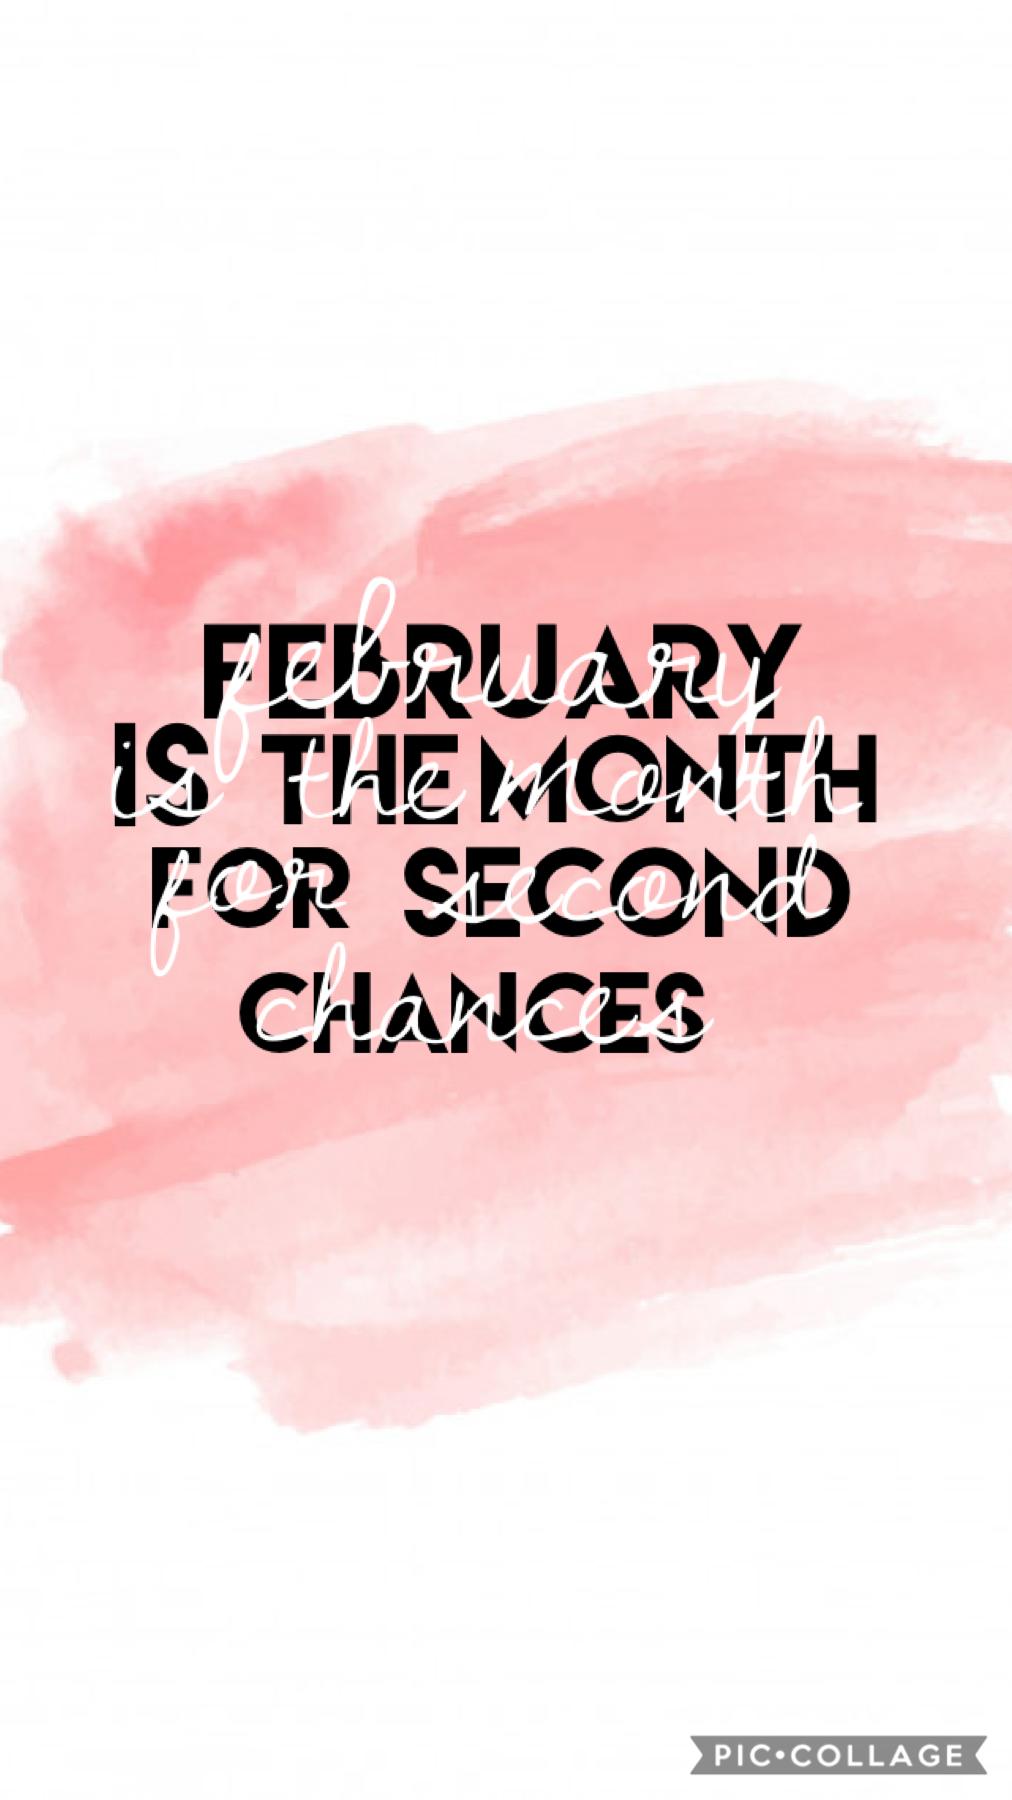 Hi everyone!! I’m back now, sorry I haven’t posted in a while. And happy February have a great month!!